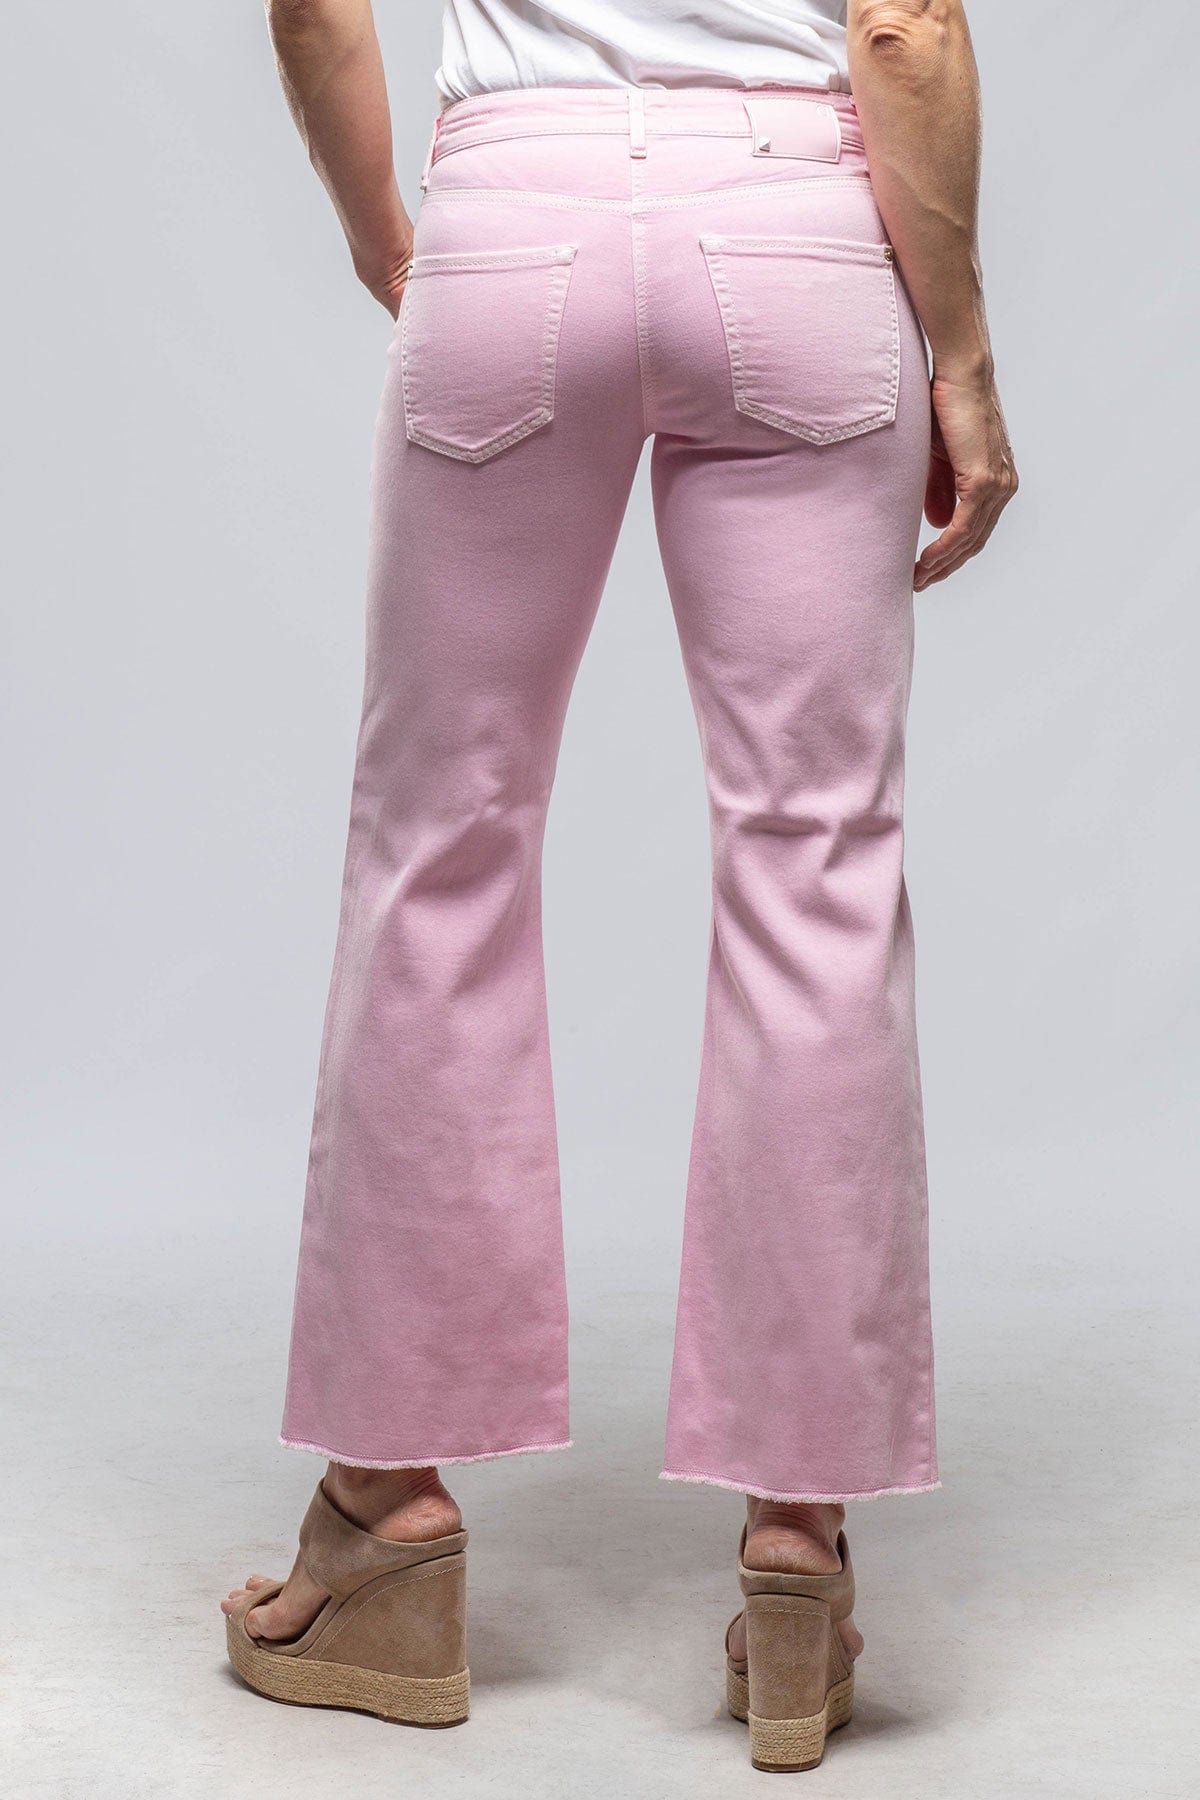 Cambio Francesca Cropped Jeans in Light Pink Ladies - Pants - Jeans